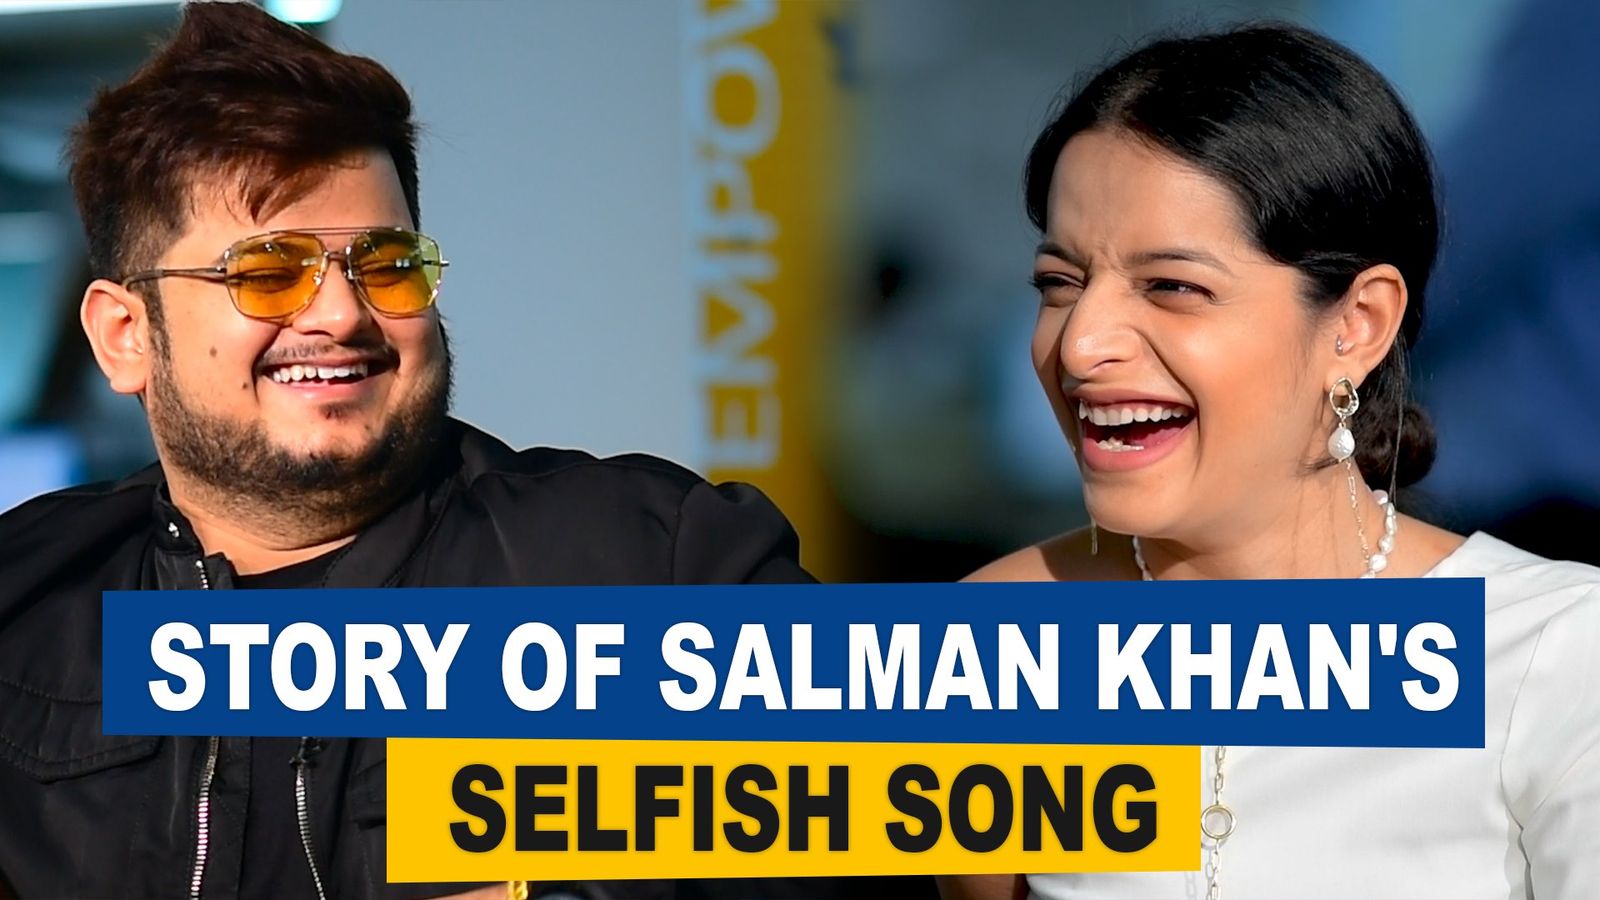 Exclusive Video: Tareefan Singer Lisa Mishra And Vishal Mishra Of Selfish Fame Opens Up About Their Recent Collaboration Saajna Ve